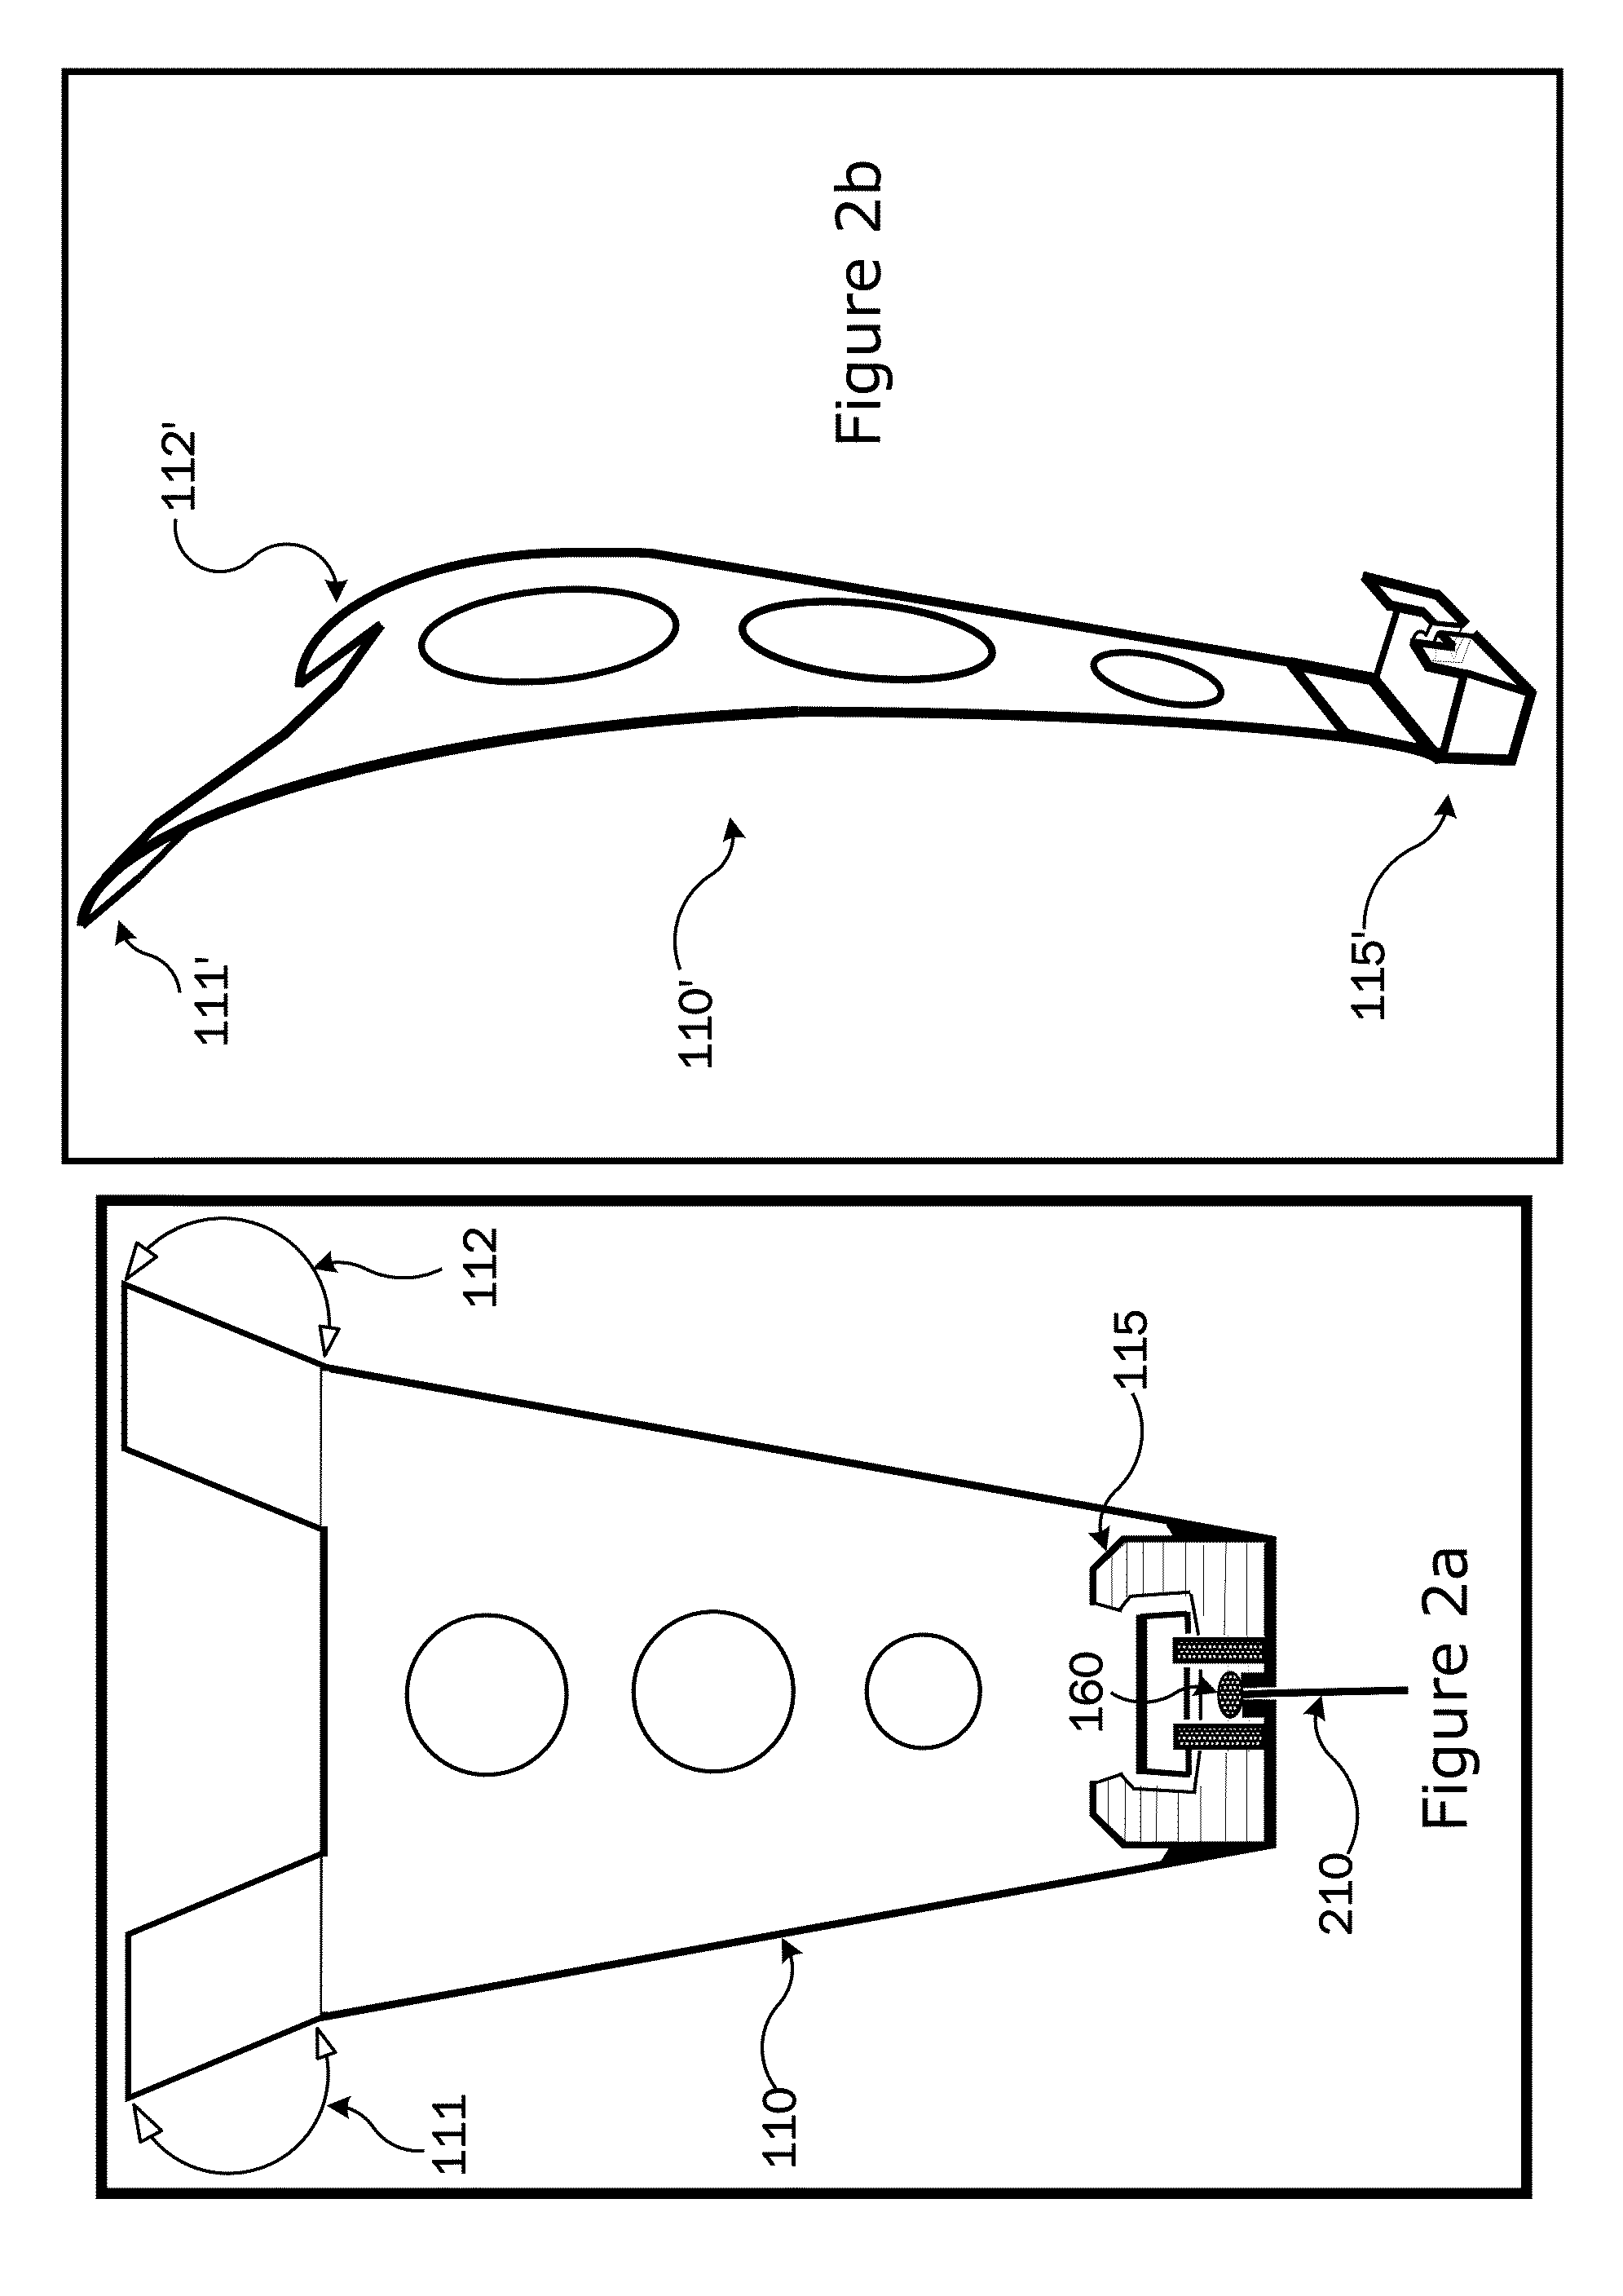 Central osteoarticular relief and performance structured load distribution system device and modular scalable vest system